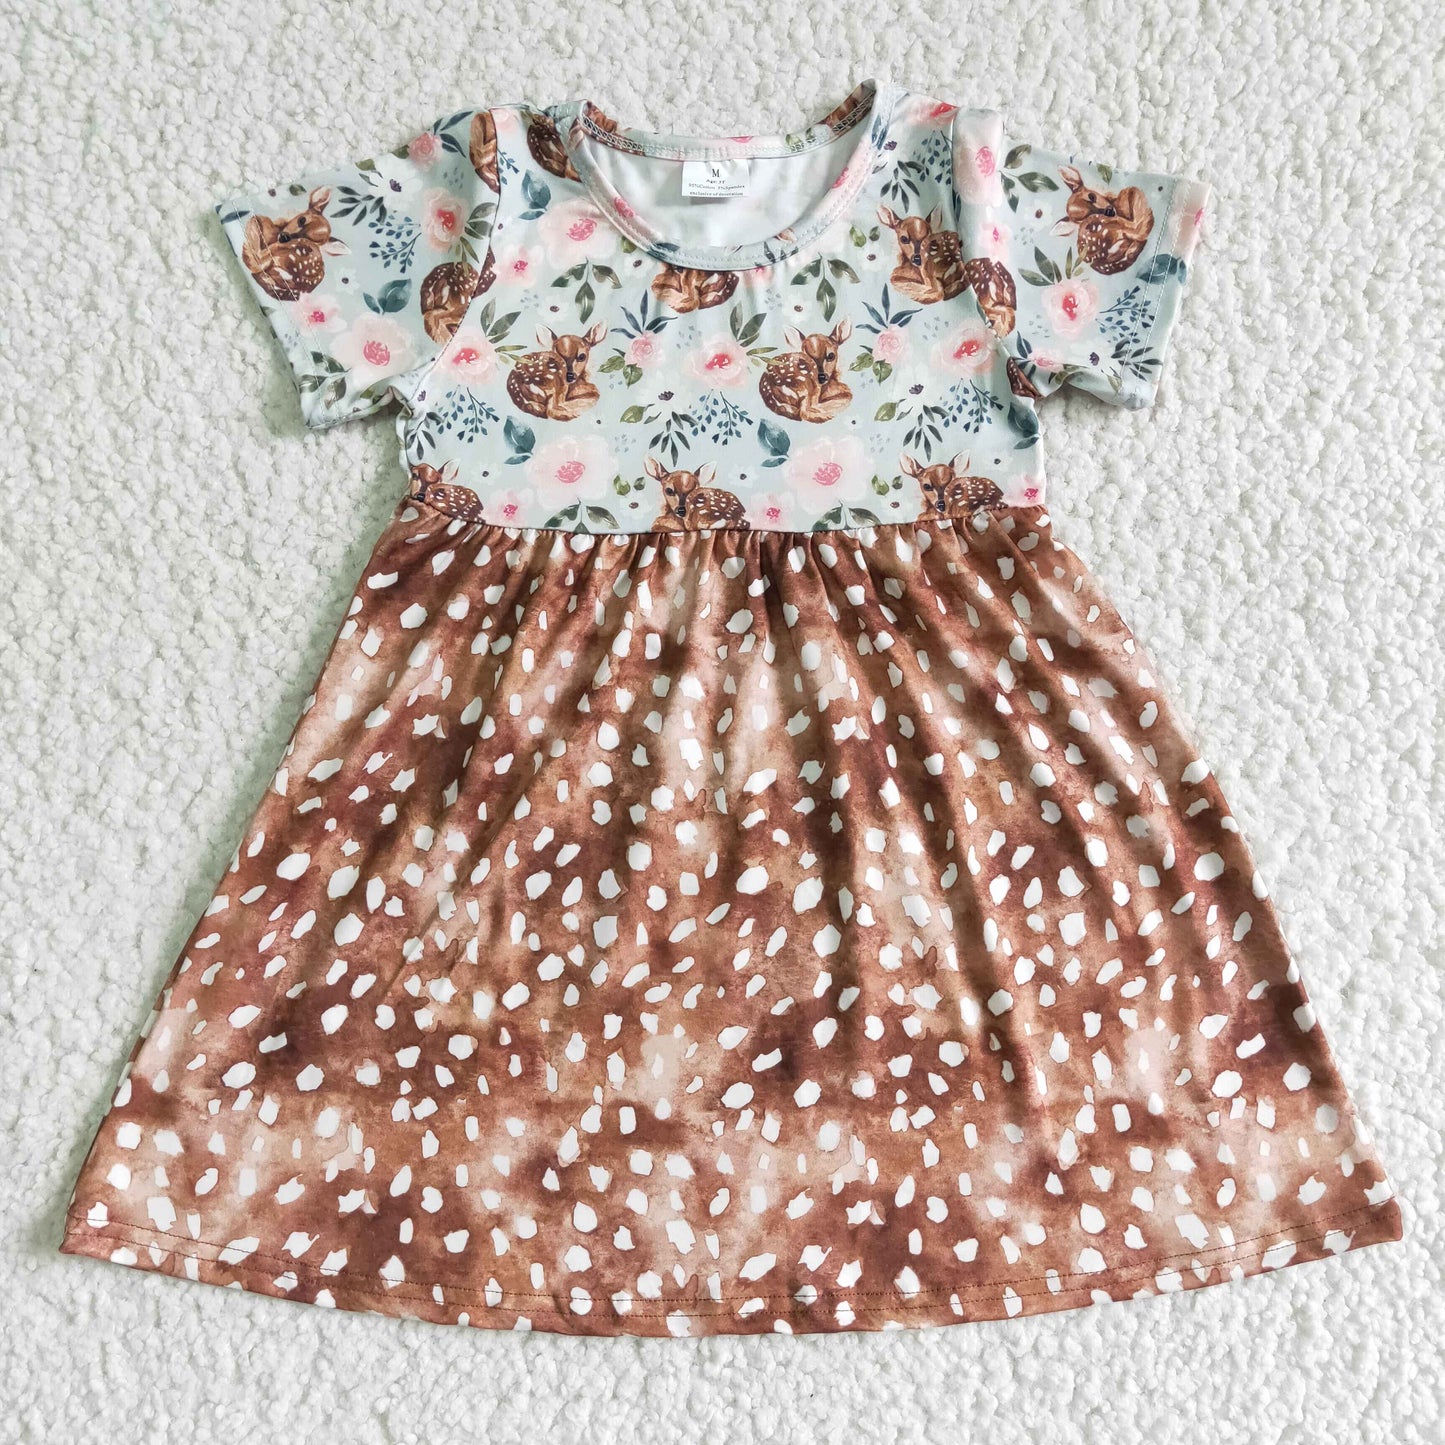 girl's clothing dress floral fawn